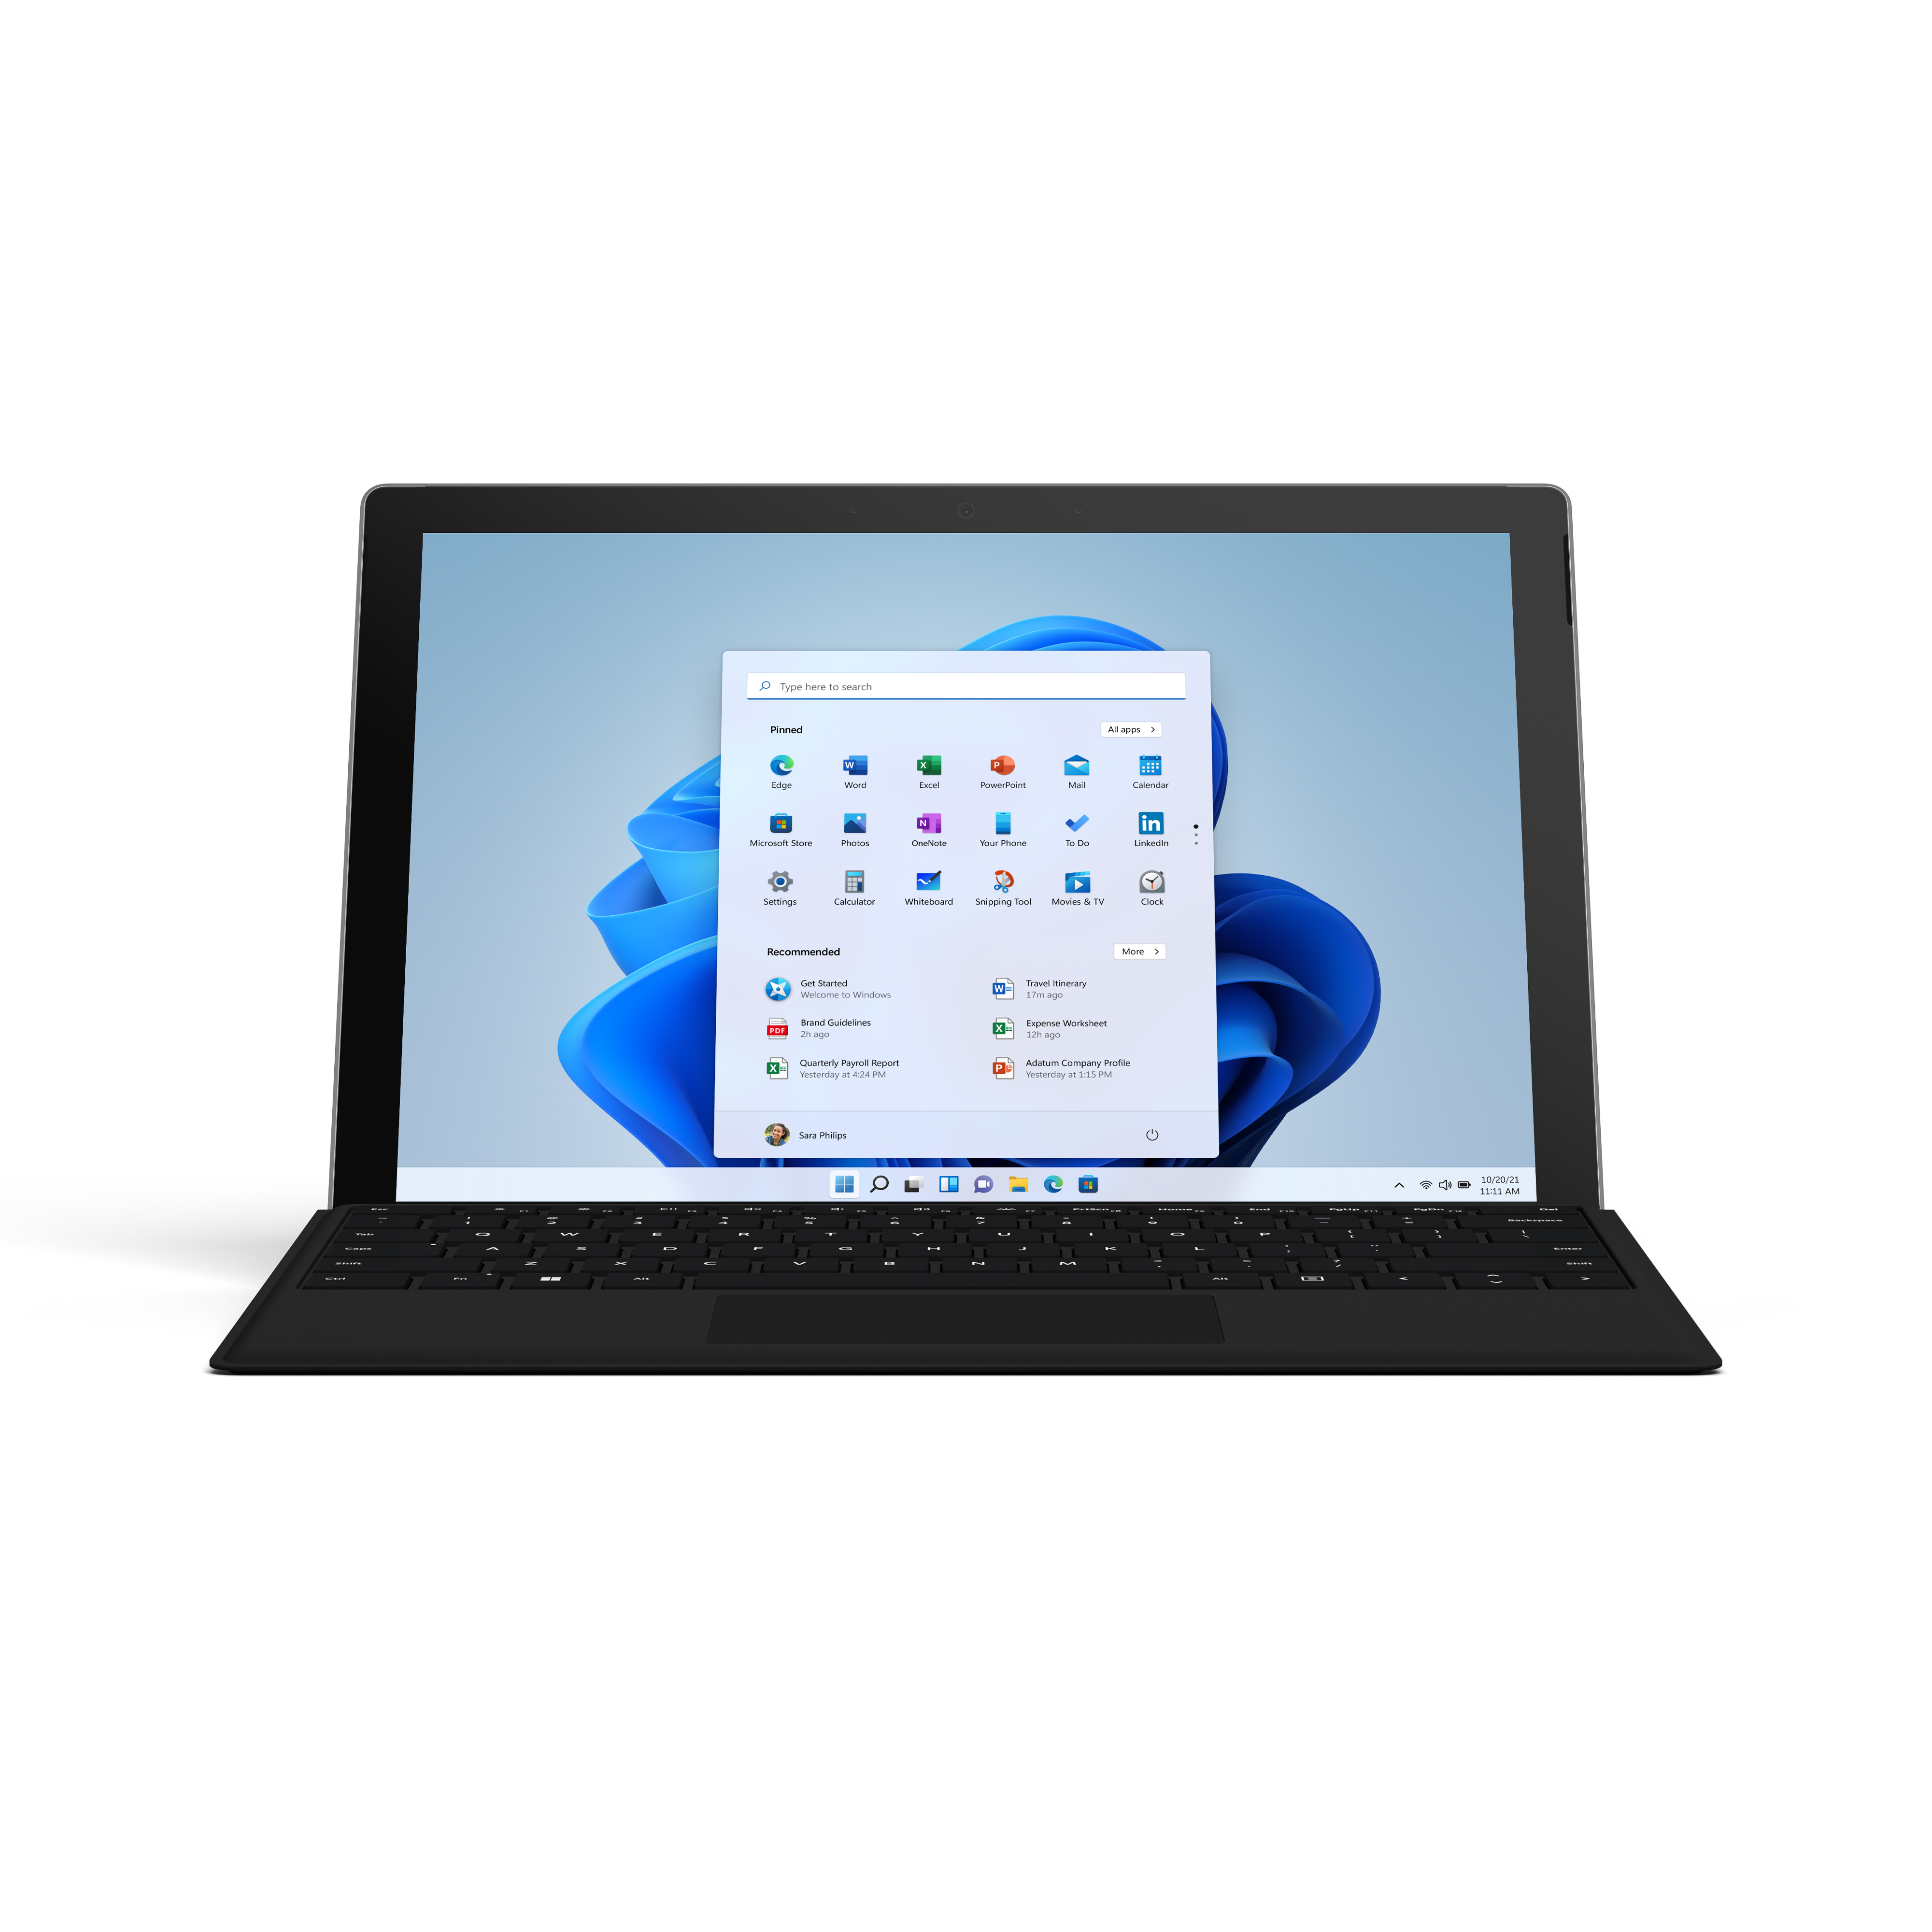 Microsoft Surface Pro 7+ 2-In-1, 12.3" Touch Screen, Intel Core i3, 8GB RAM, 128GB SSD, Windows 11 Home, Platinum, with Black Type Cover - image 2 of 8